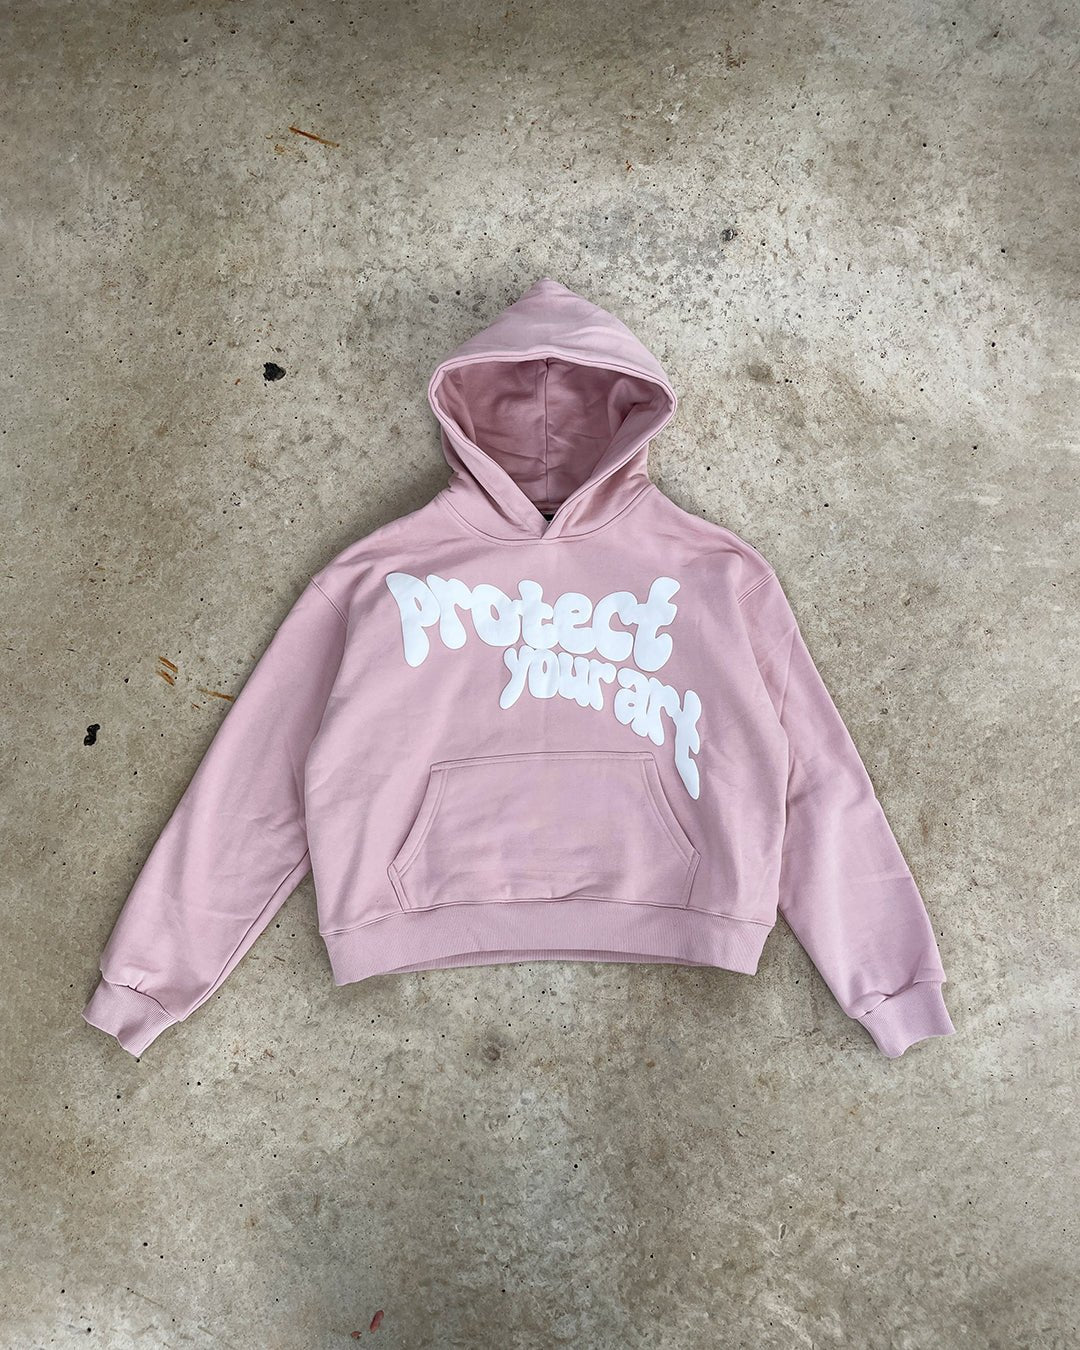 protect your art hoodie pink - Statement